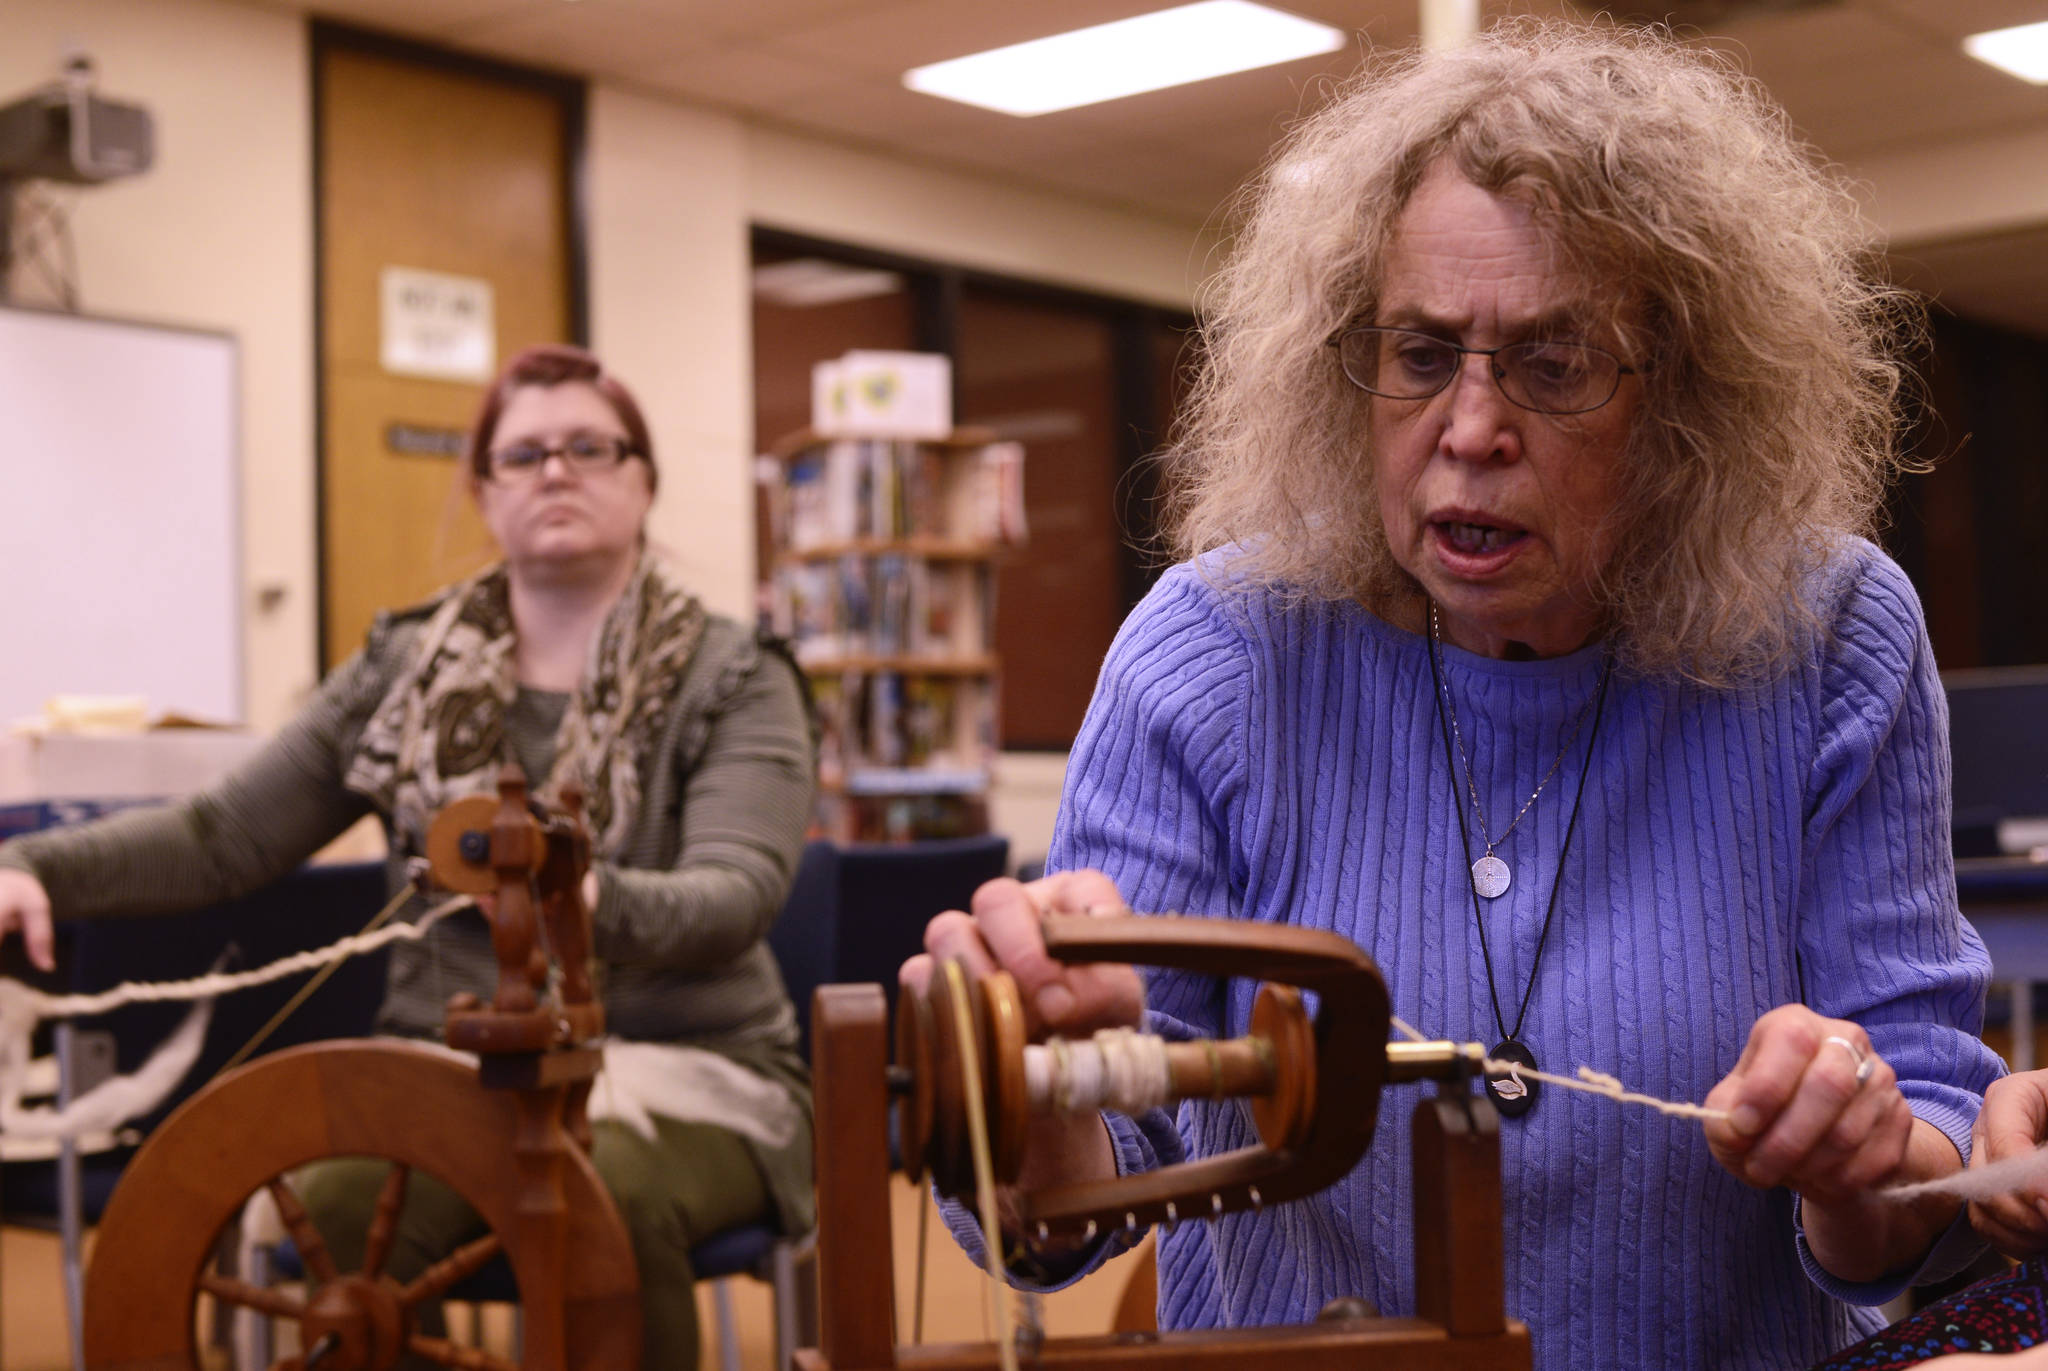 Instructor Lee Coray-Ludden (center) shows how to spin yarn from wool on a kick-driven spinning wheel, with student Amy Townson practicing in the background on Tuesday, March 20, 2018 in the Soldotna Preparatory School library in Soldotna, Alaska. In her four-session weekly yarn spinning class, part of the Soldotna Community Schools program, Coray-Ludden will teach students to spin and ply yarn from locally-grown wool and fleece, including exotic fibers from cashmere goats, alpacas, and llamas. (Photo by Ben Boettger/Peninsula Clarion).